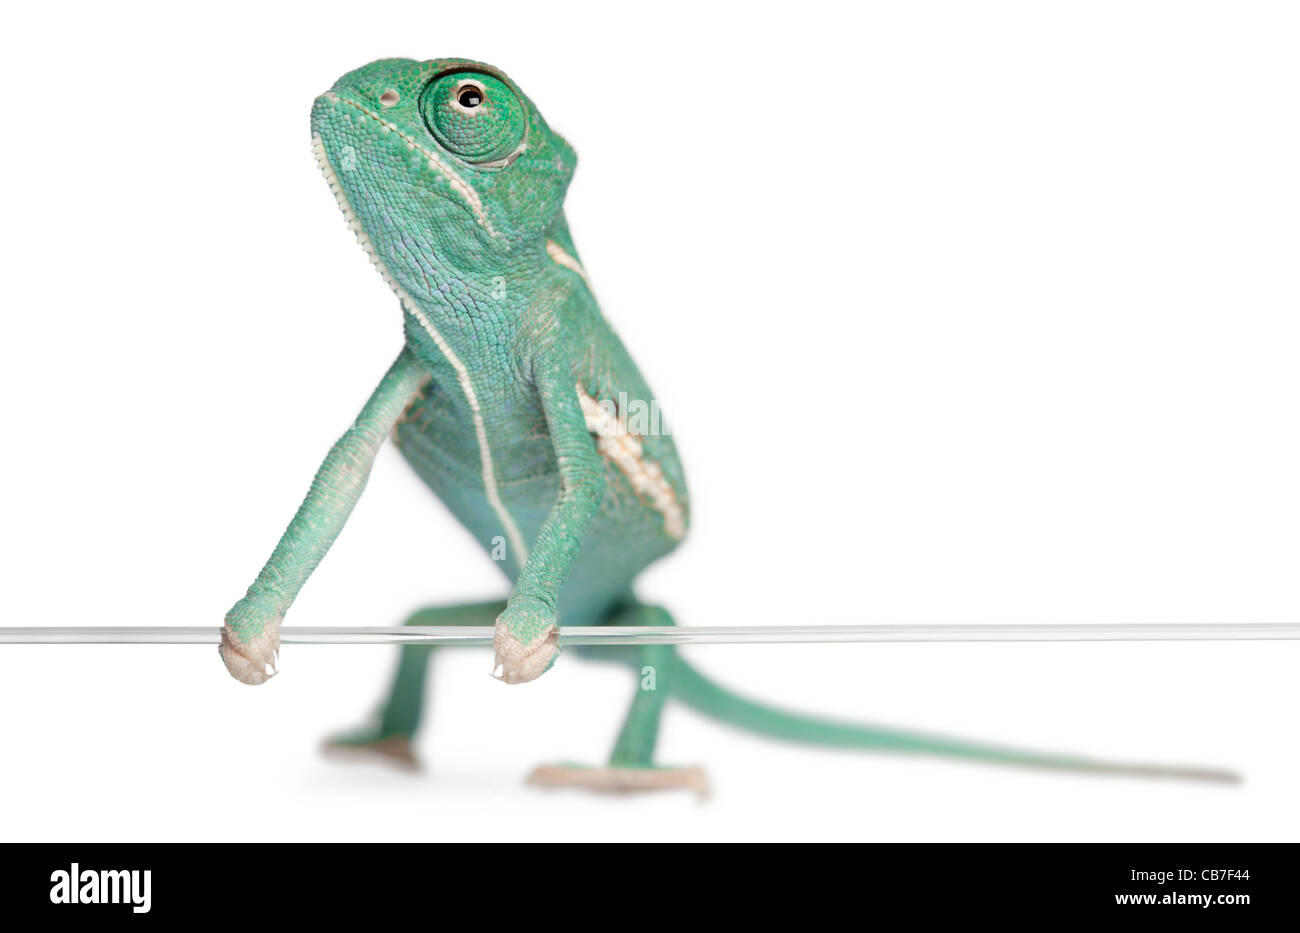 Young veiled chameleon, Chamaeleo calyptratus, holding string in front of white background Stock Photo